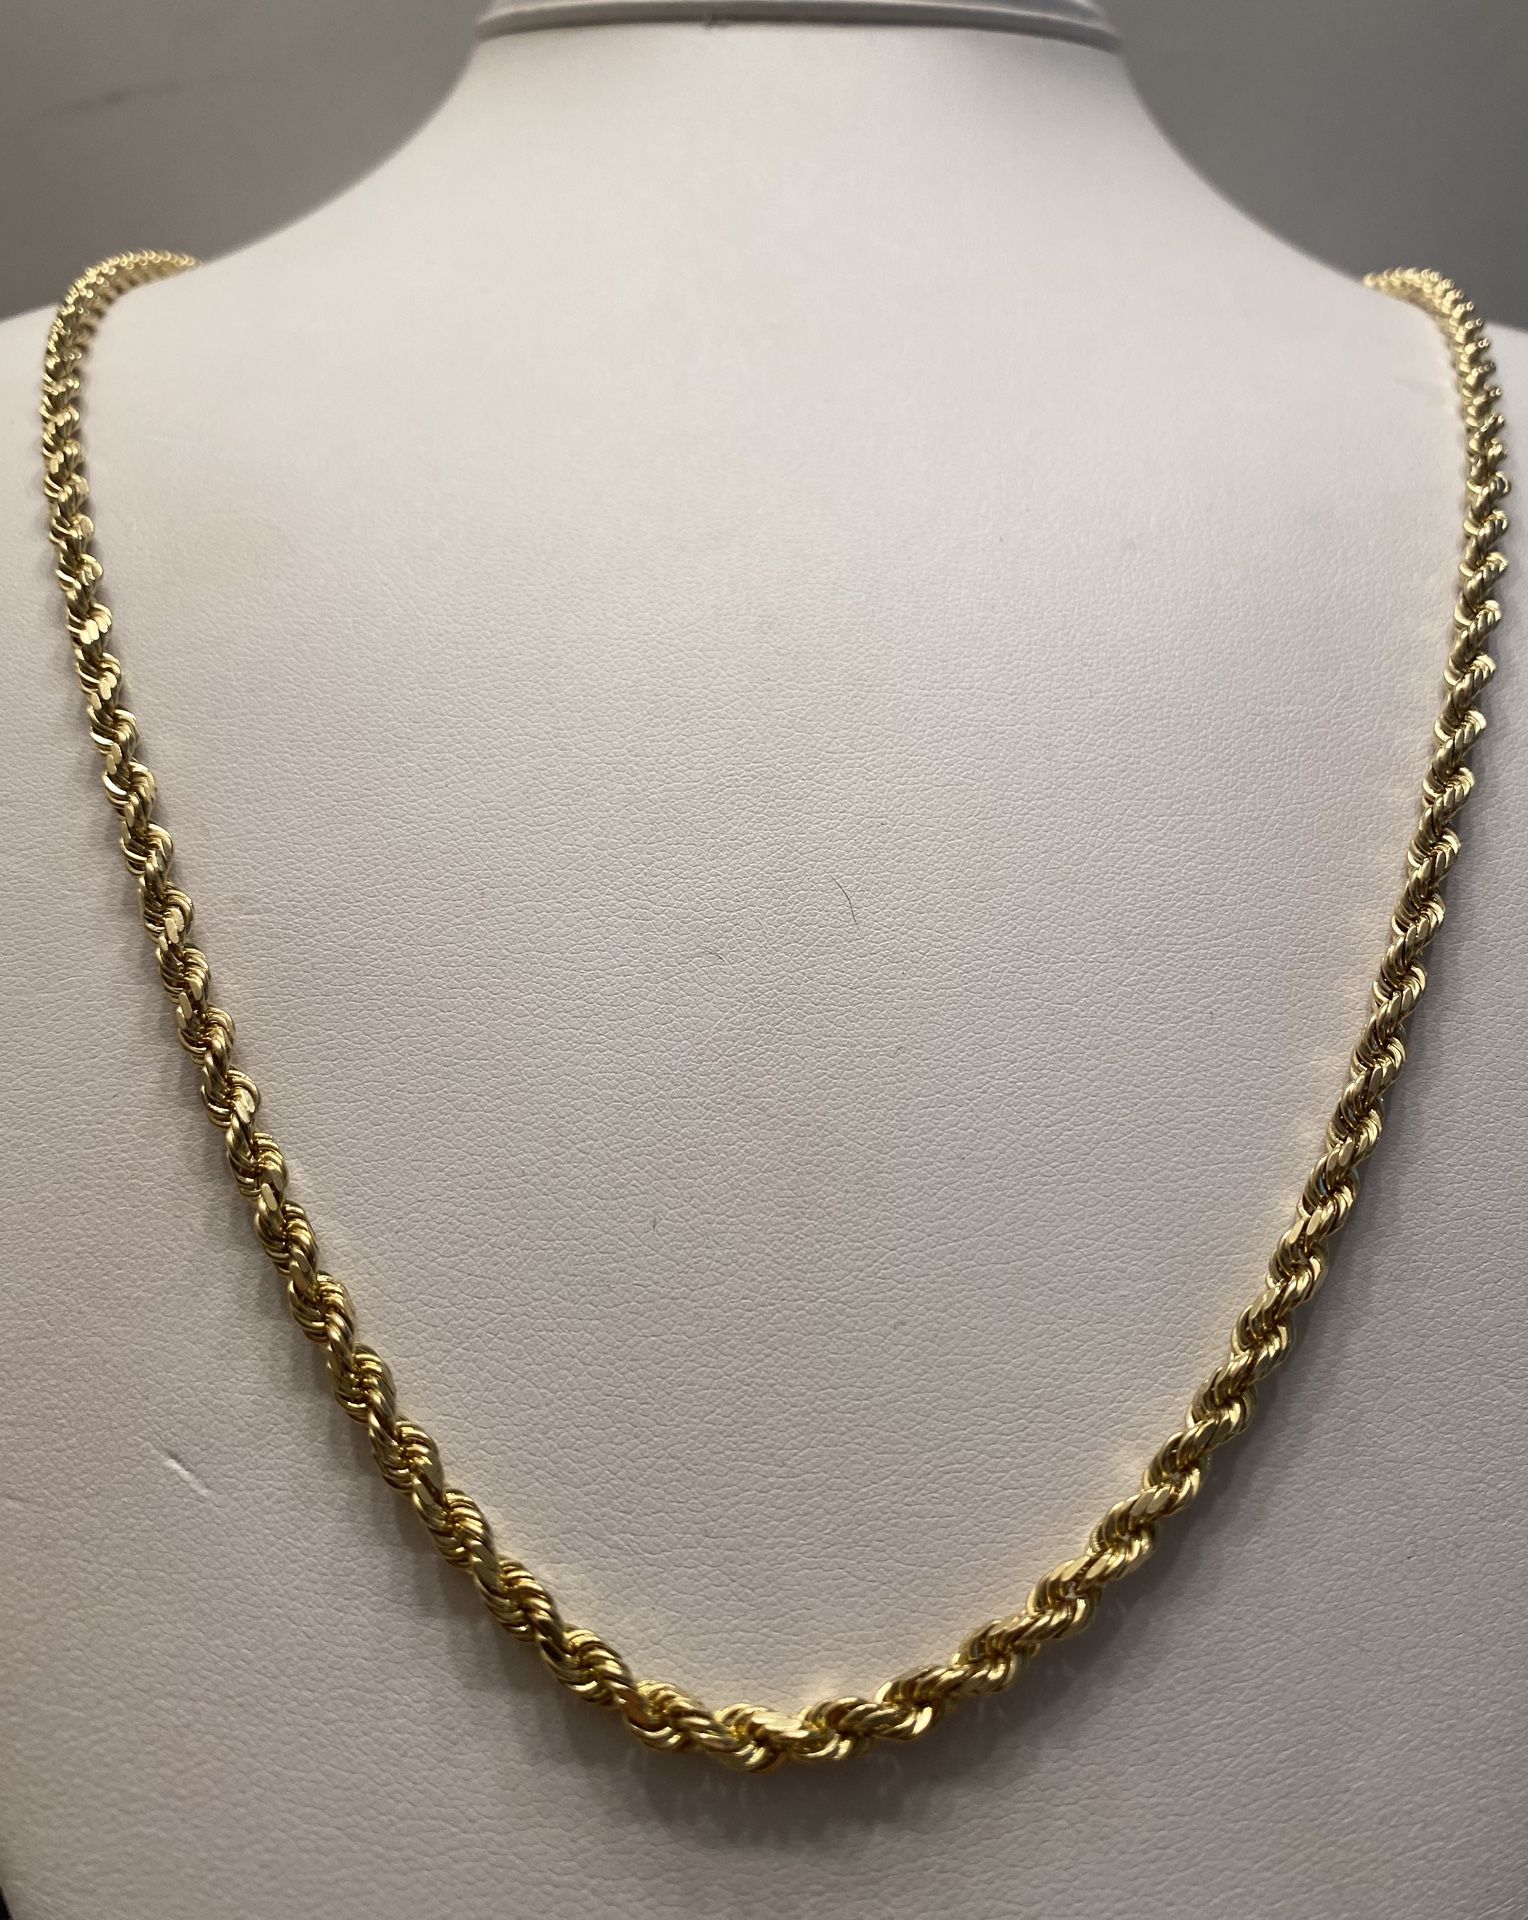 24” 14KT YELLOW GOLD ROPE CHAIN 30 GRAMS 4MM THICK